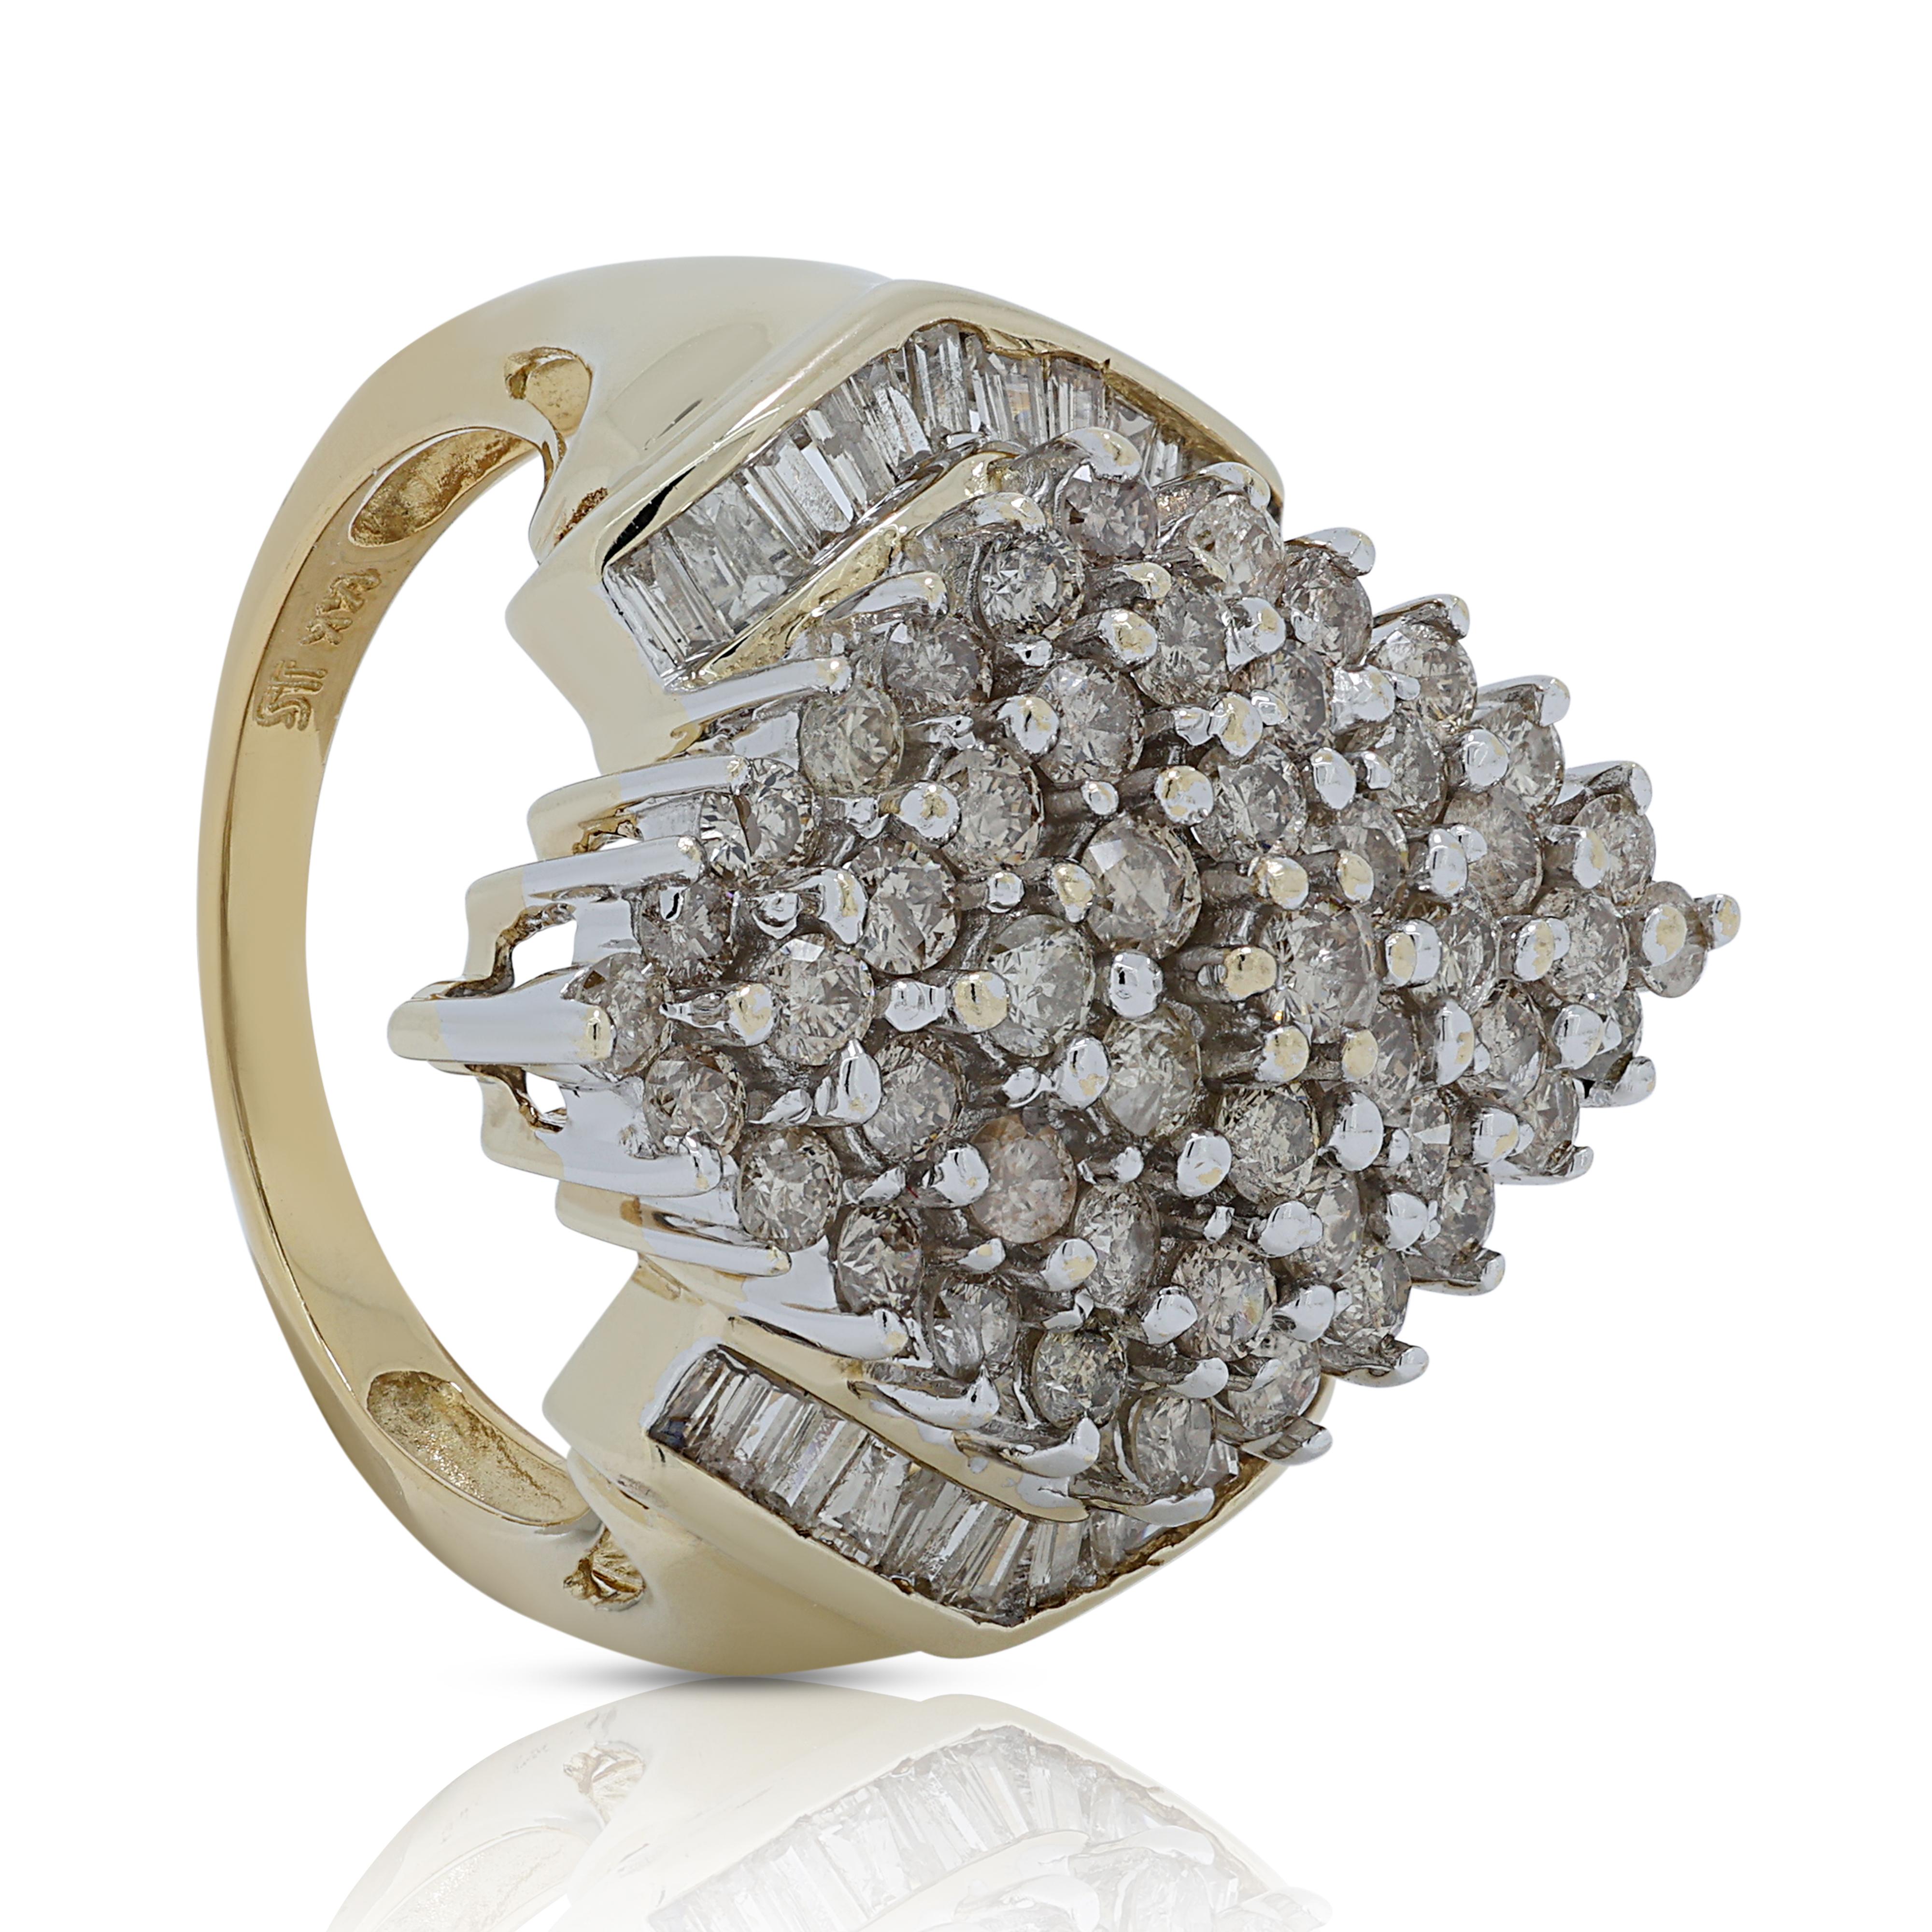 Gorgeous 1.75ct Diamonds Cluster Ring in 14K Yellow Gold 2